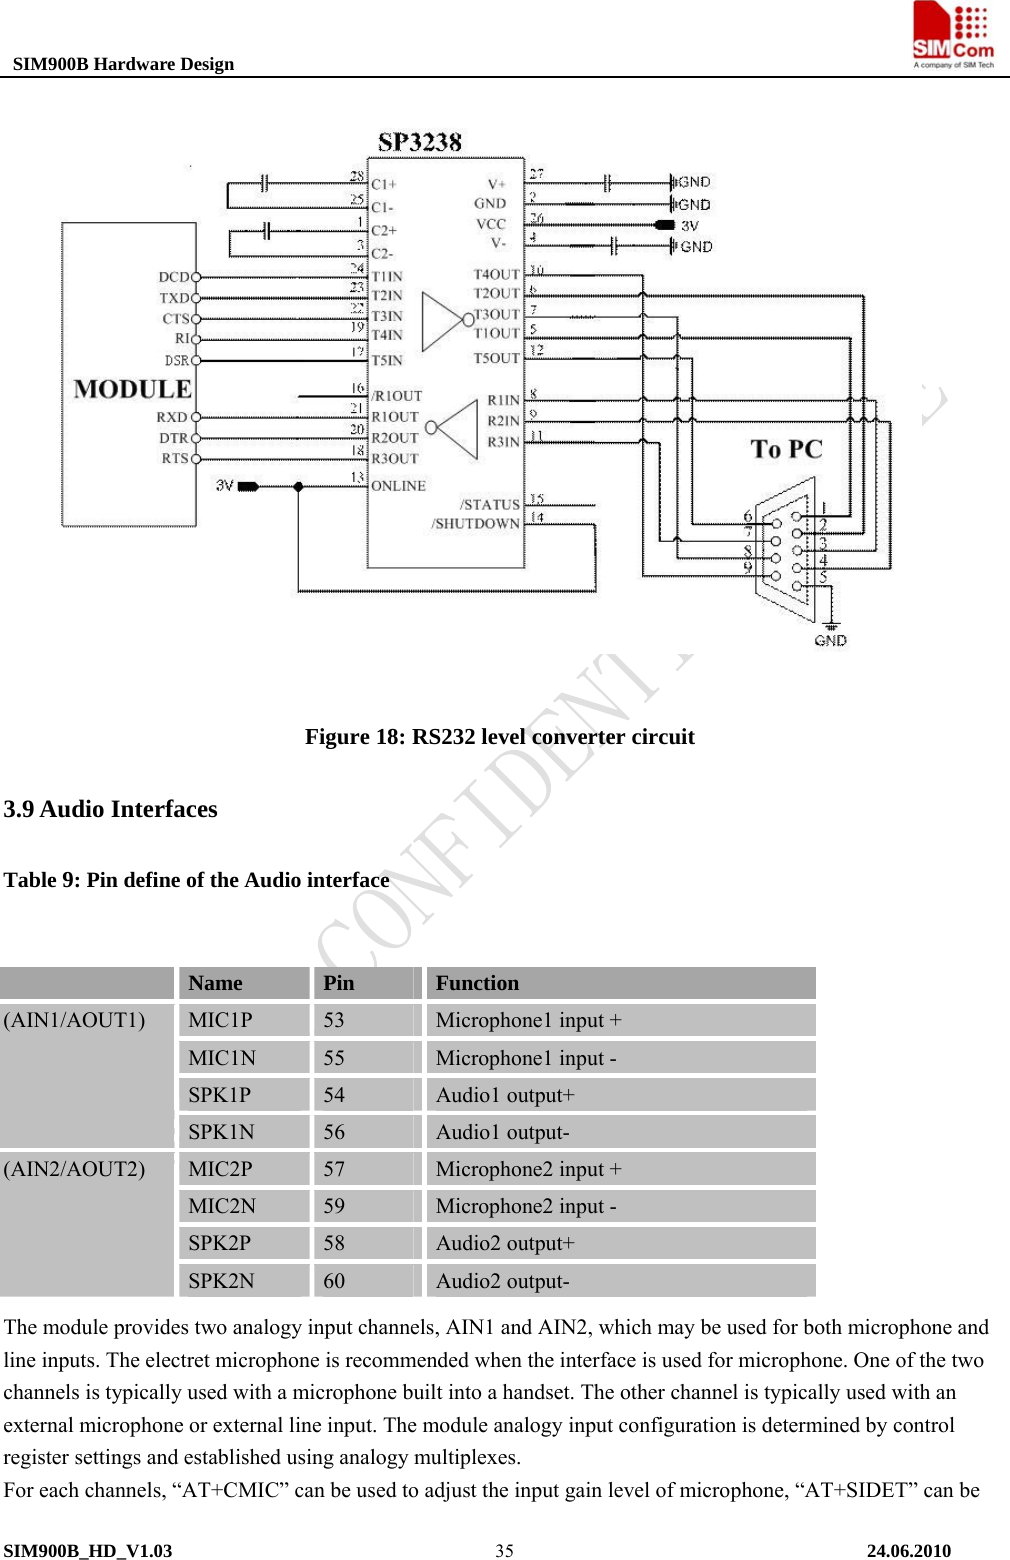  SIM900B Hardware Design                                                                             Figure 18: RS232 level converter circuit 3.9 Audio Interfaces Table 9: Pin define of the Audio interface    Name  Pin  Function MIC1P  53  Microphone1 input + MIC1N  55  Microphone1 input - SPK1P  54  Audio1 output+ (AIN1/AOUT1)  SPK1N  56  Audio1 output- MIC2P  57  Microphone2 input + MIC2N  59  Microphone2 input - SPK2P  58  Audio2 output+ (AIN2/AOUT2) SPK2N  60  Audio2 output-           The module provides two analogy input channels, AIN1 and AIN2, which may be used for both microphone and line inputs. The electret microphone is recommended when the interface is used for microphone. One of the two channels is typically used with a microphone built into a handset. The other channel is typically used with an external microphone or external line input. The module analogy input configuration is determined by control register settings and established using analogy multiplexes. For each channels, “AT+CMIC” can be used to adjust the input gain level of microphone, “AT+SIDET” can be SIM900B_HD_V1.03                                                                          24.06.2010  35